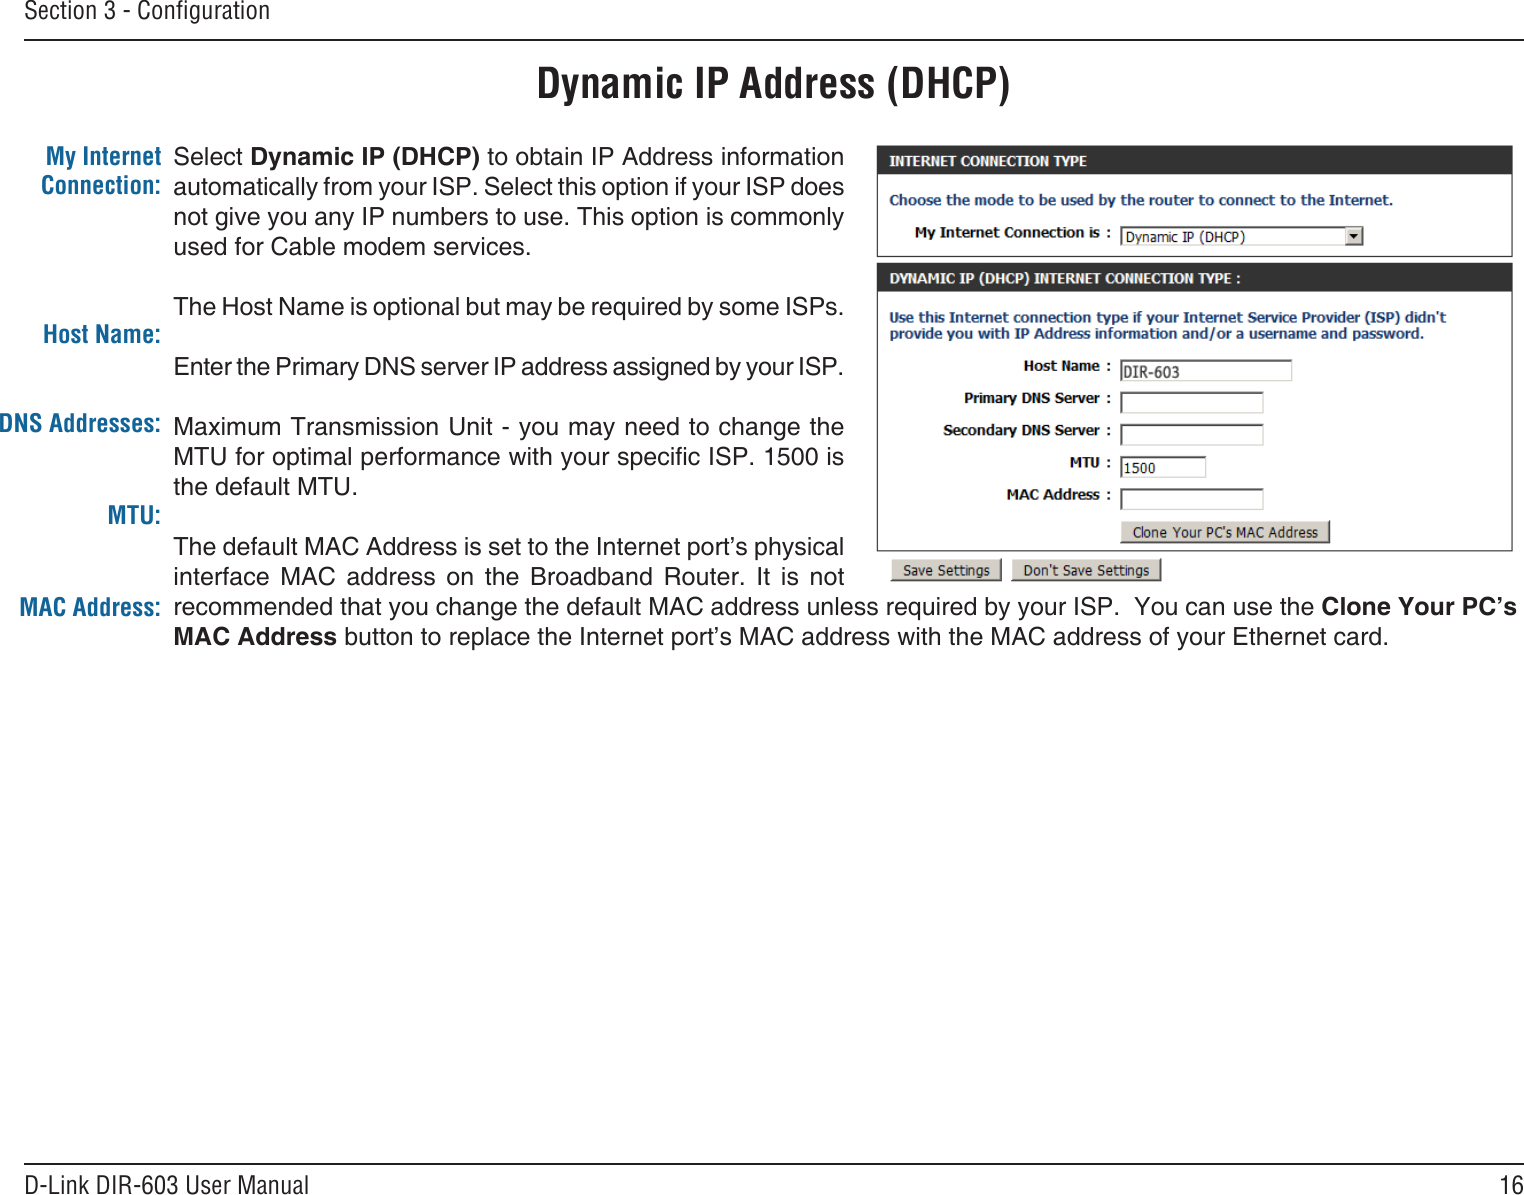 16D-Link DIR-603 User ManualSection 3 - CongurationDynamic IP Address (DHCP)Select Dynamic IP (DHCP) to obtain IP Address information automatically from your ISP. Select this option if your ISP does not give you any IP numbers to use. This option is commonly used for Cable modem services.The Host Name is optional but may be required by some ISPs. Enter the Primary DNS server IP address assigned by your ISP.Maximum Transmission Unit - you may need to change the MTU for optimal performance with your specic ISP. 1500 is the default MTU.The default MAC Address is set to the Internet port’s physical interface  MAC  address  on  the  Broadband  Router.  It  is  not recommended that you change the default MAC address unless required by your ISP.  You can use the Clone Your PC’s MAC Address button to replace the Internet port’s MAC address with the MAC address of your Ethernet card.My Internet Connection:Host Name:MTU:MAC Address:DNS Addresses: